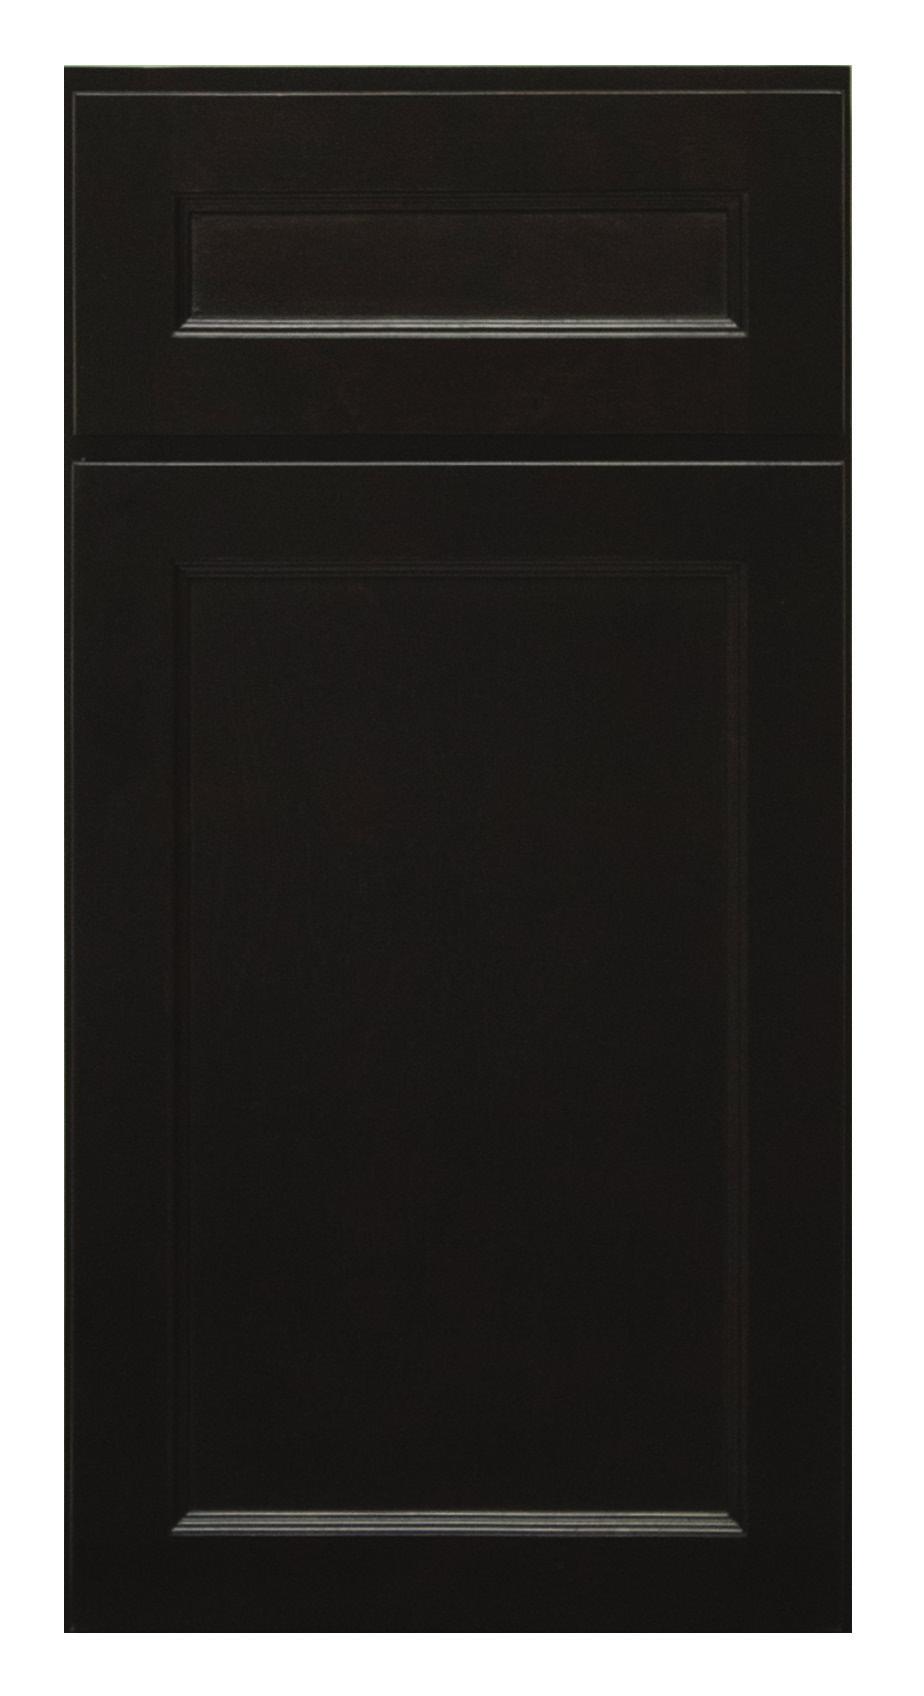 PORTER A deep rich espresso stain with hints of black describes another new Choice Cabinet color and style Porter.